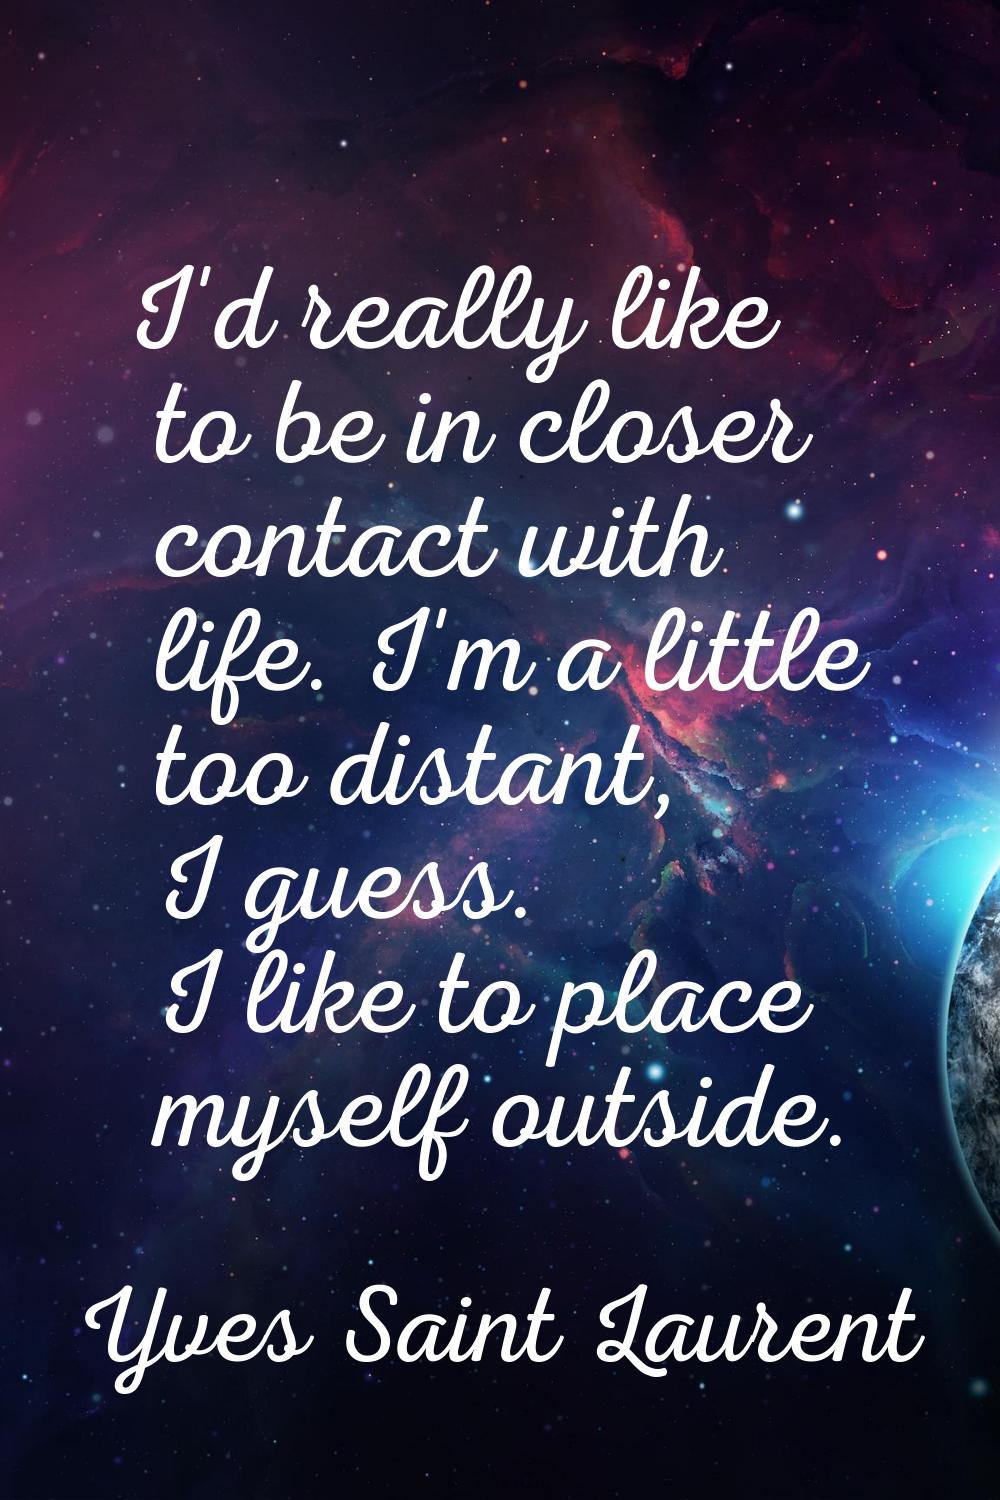 I'd really like to be in closer contact with life. I'm a little too distant, I guess. I like to pla